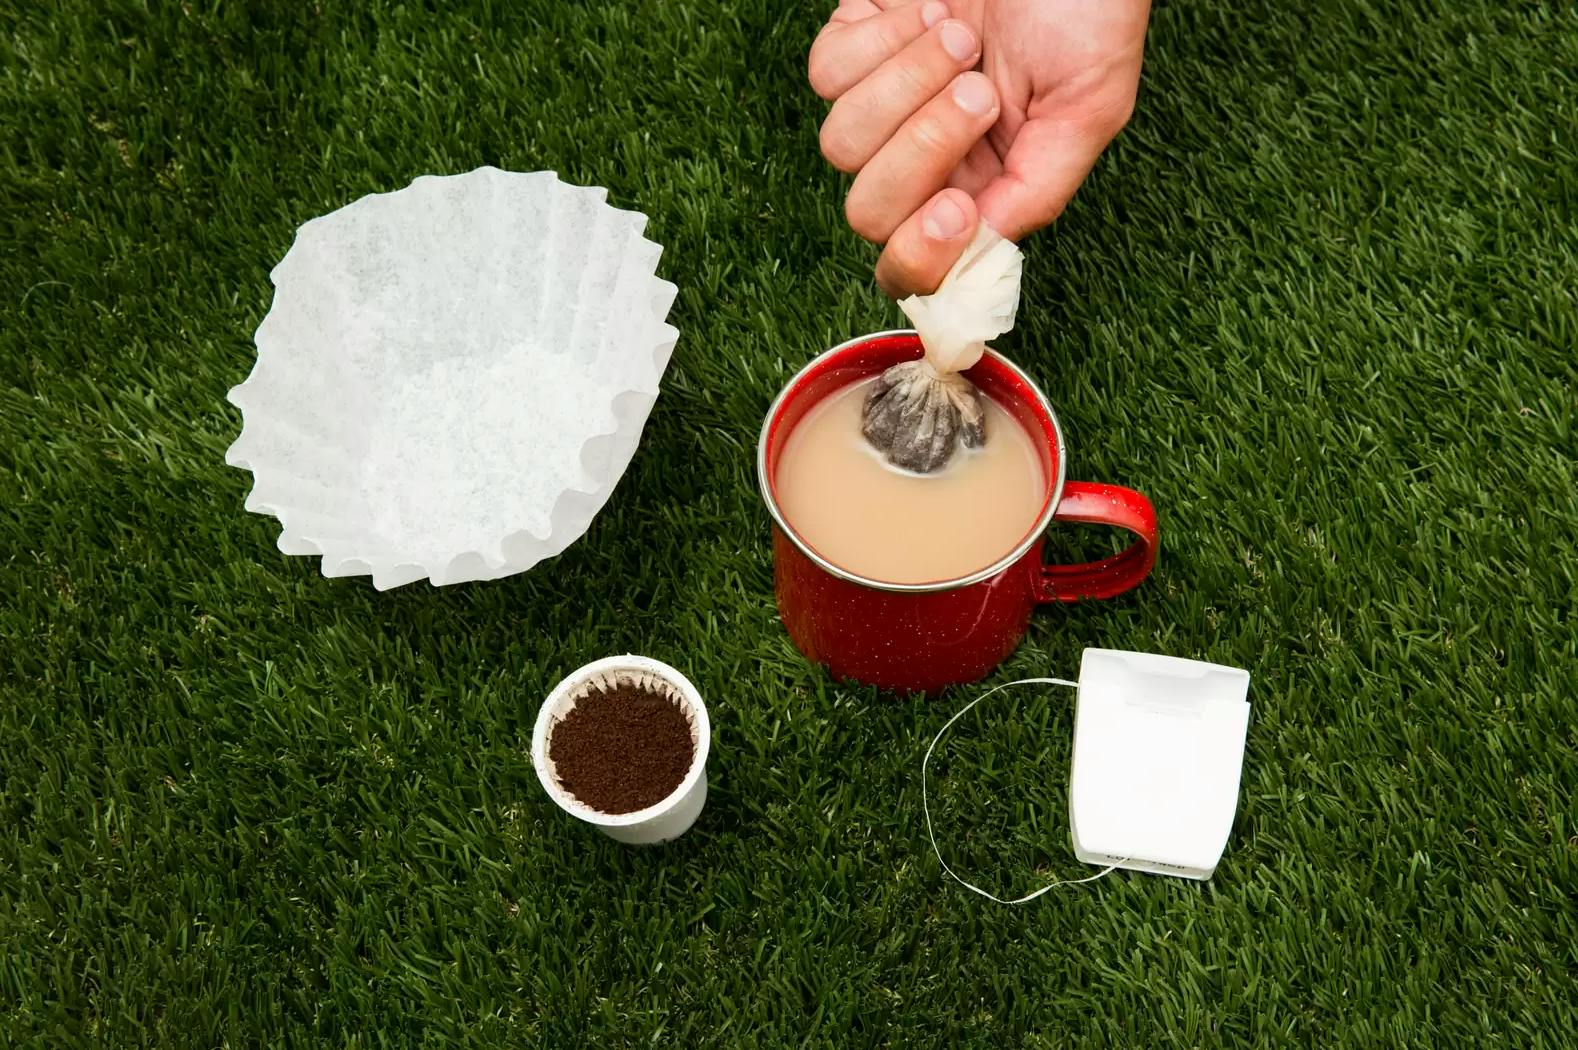 A person dipping coffee grounds wrapped in a coffee filter into a coffee mug.